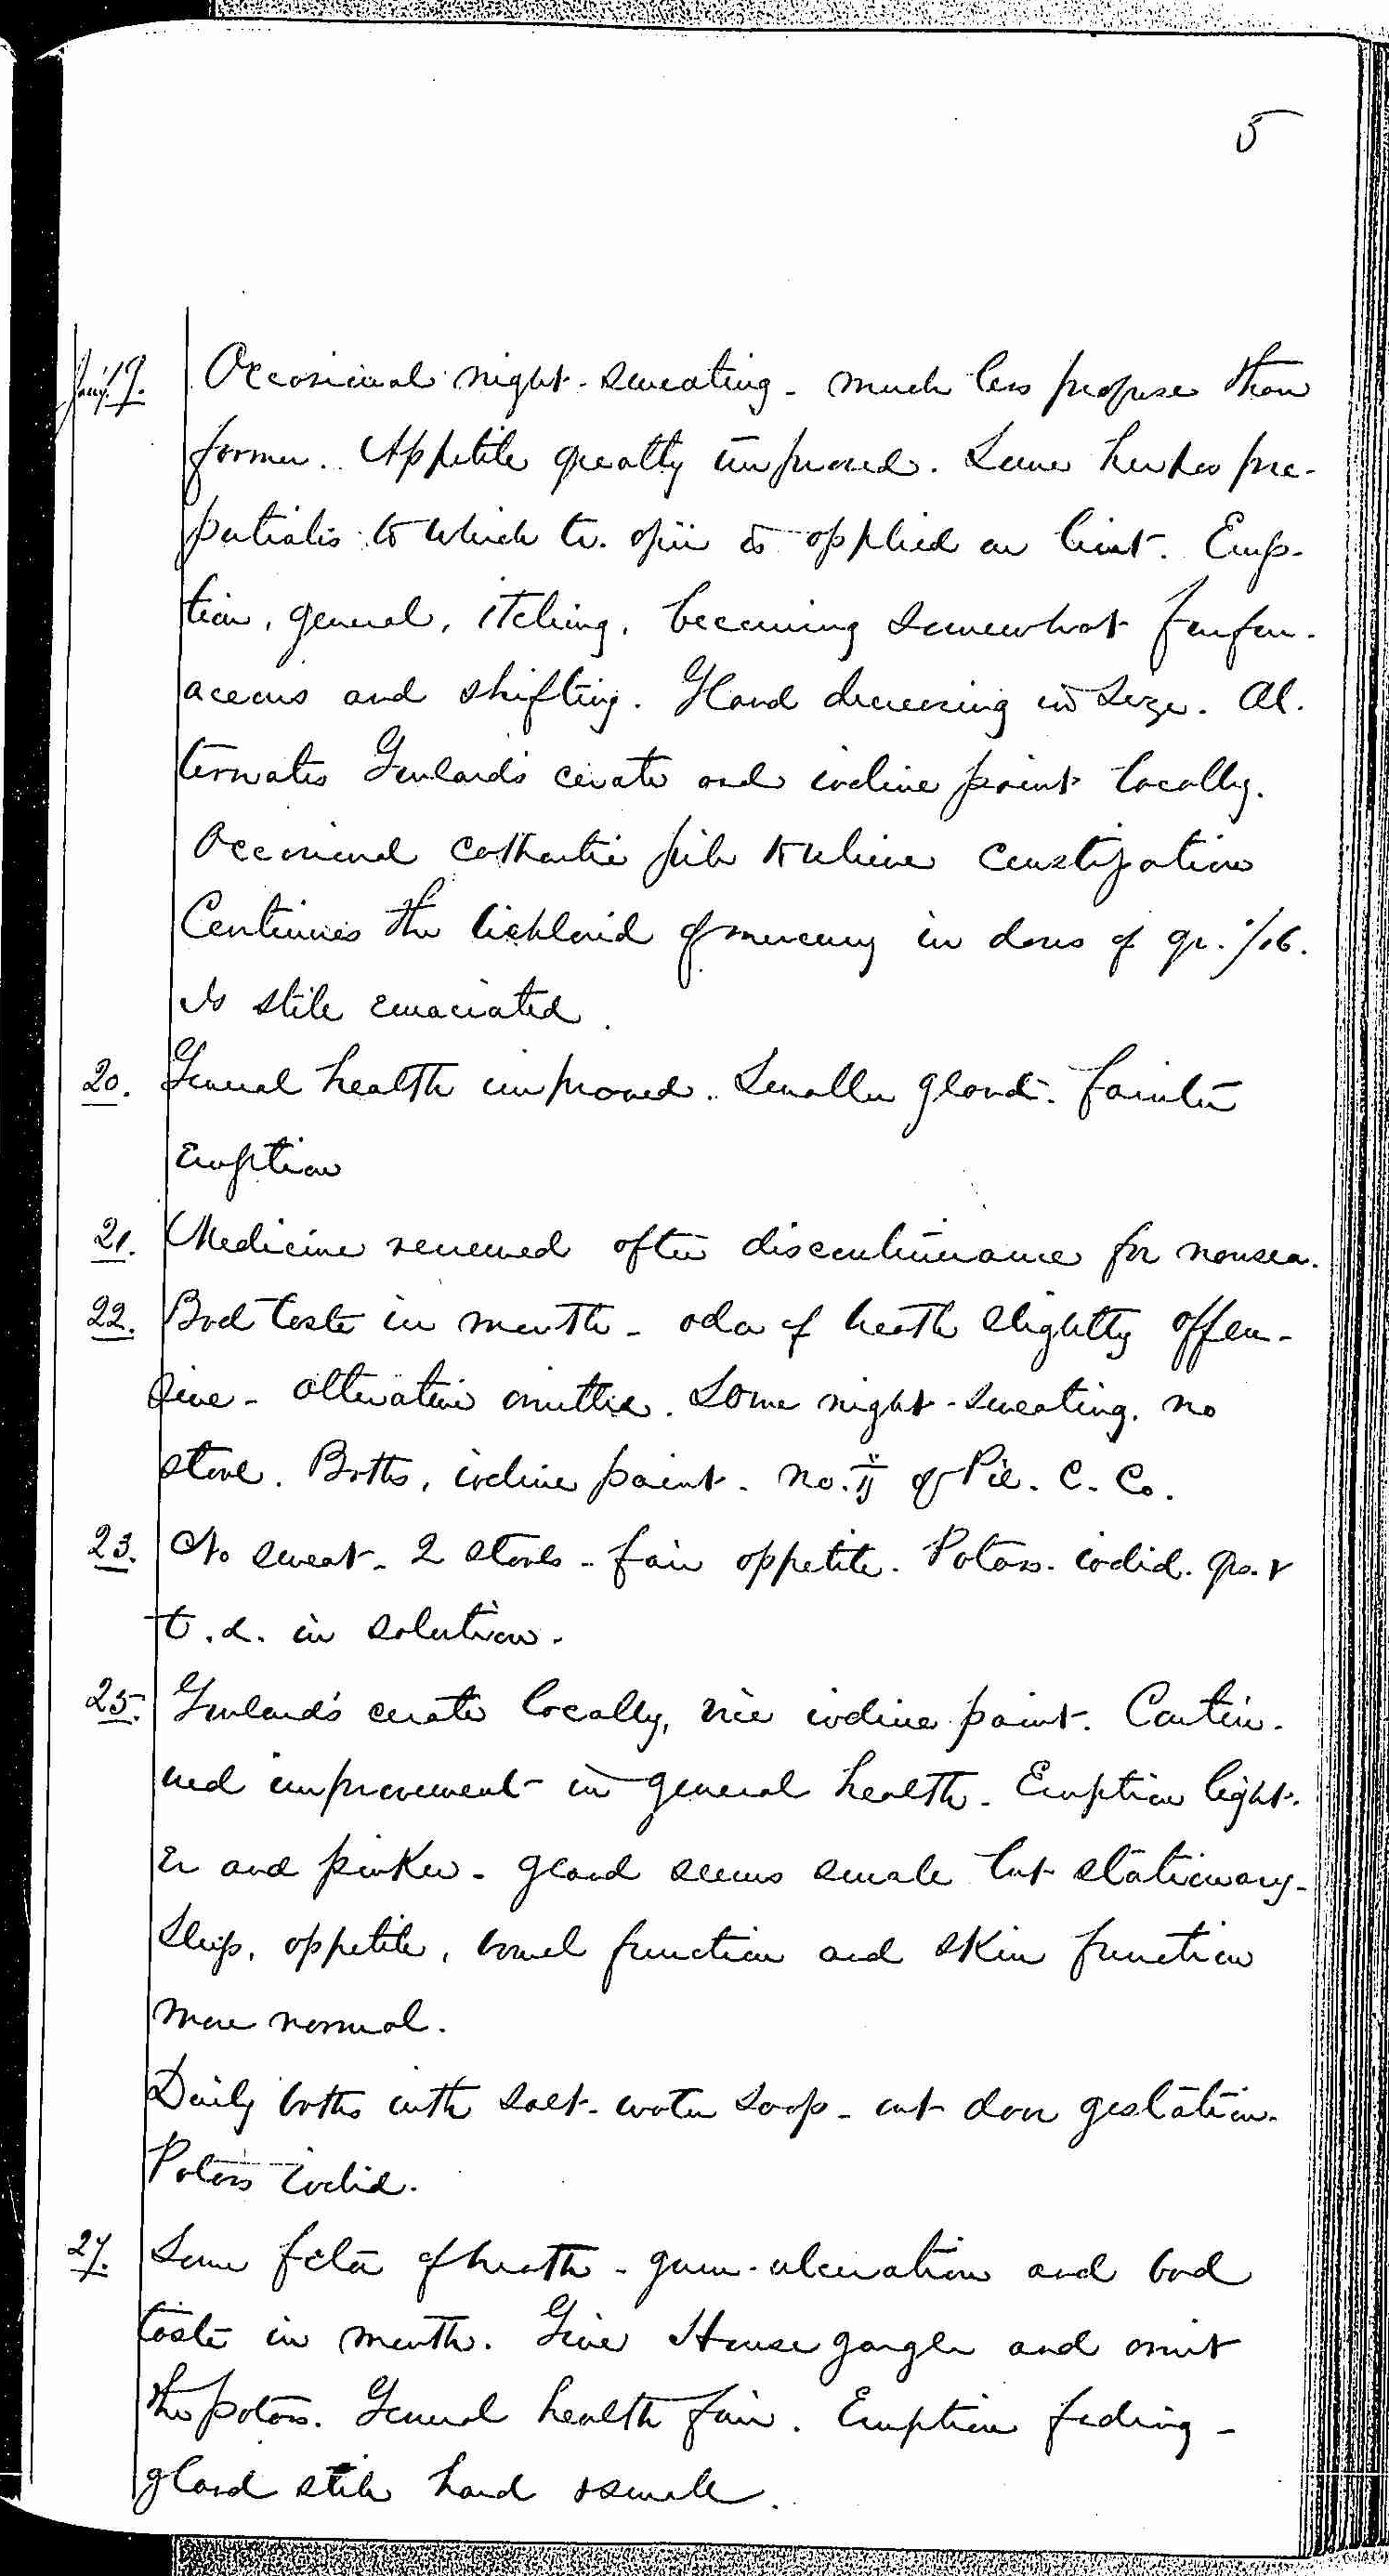 Entry for Eugene Smith (page 5 of 6) in the log Hospital Tickets and Case Papers - Naval Hospital - Washington, D.C. - 1868-69